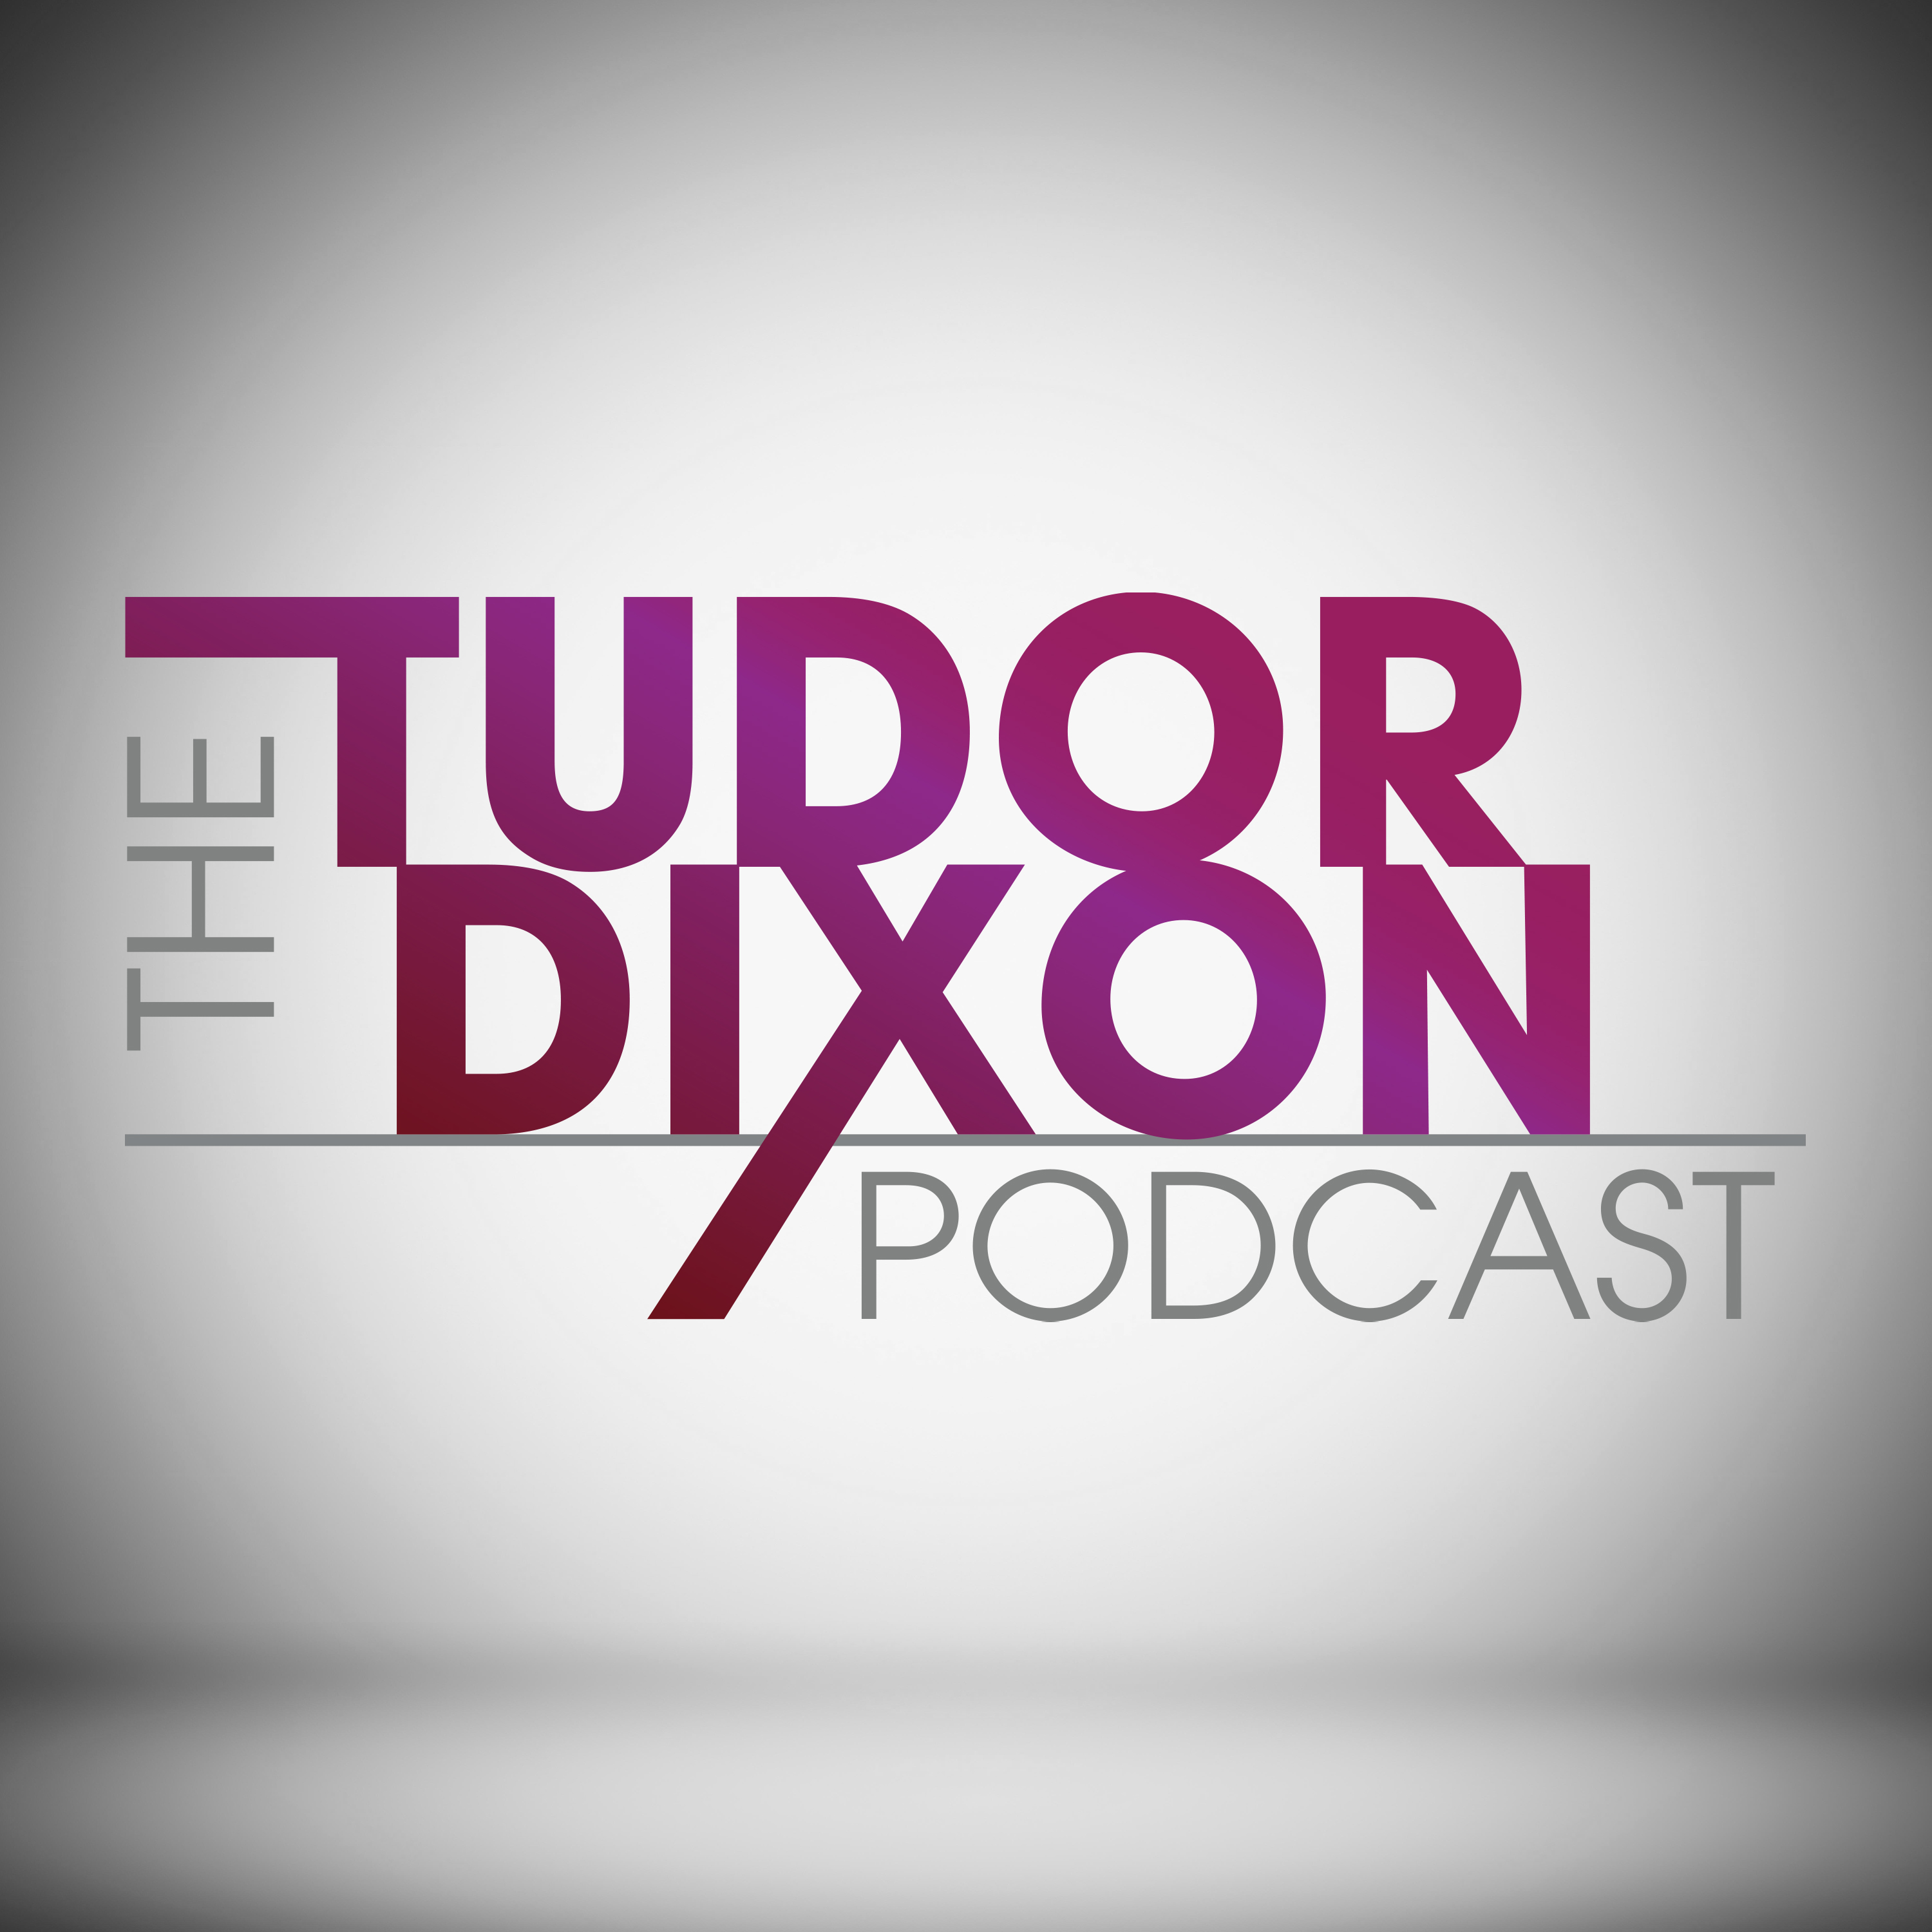 The Tudor Dixon Podcast: Love Stories from the Bible with Shannon Bream